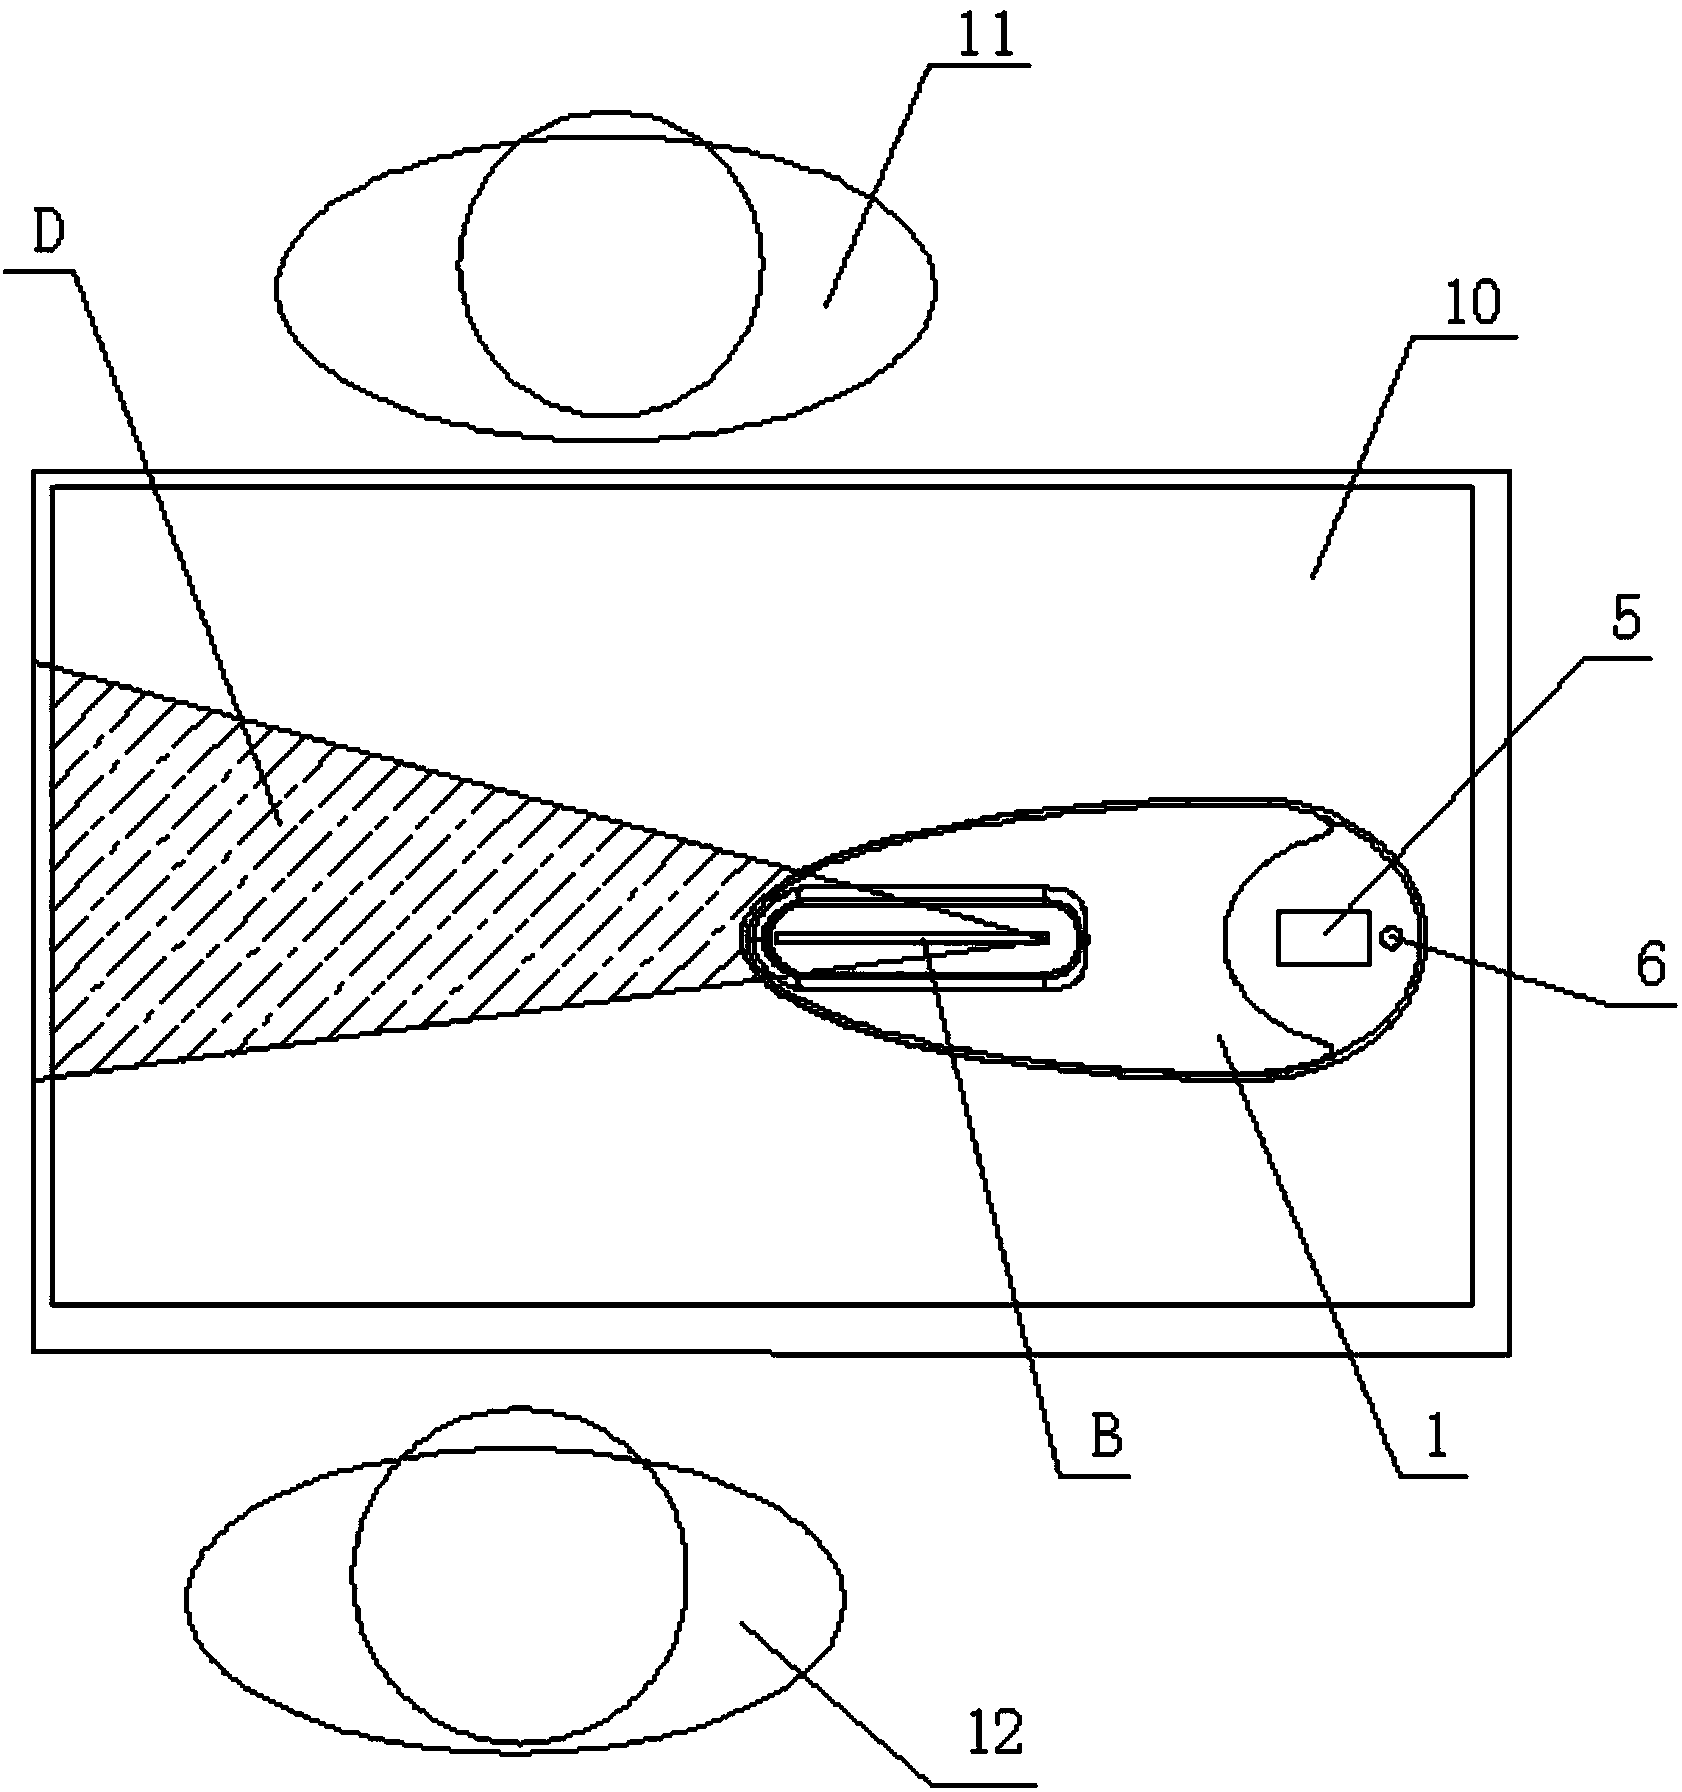 Portable air partitioning and generating device for doctor-patient separation